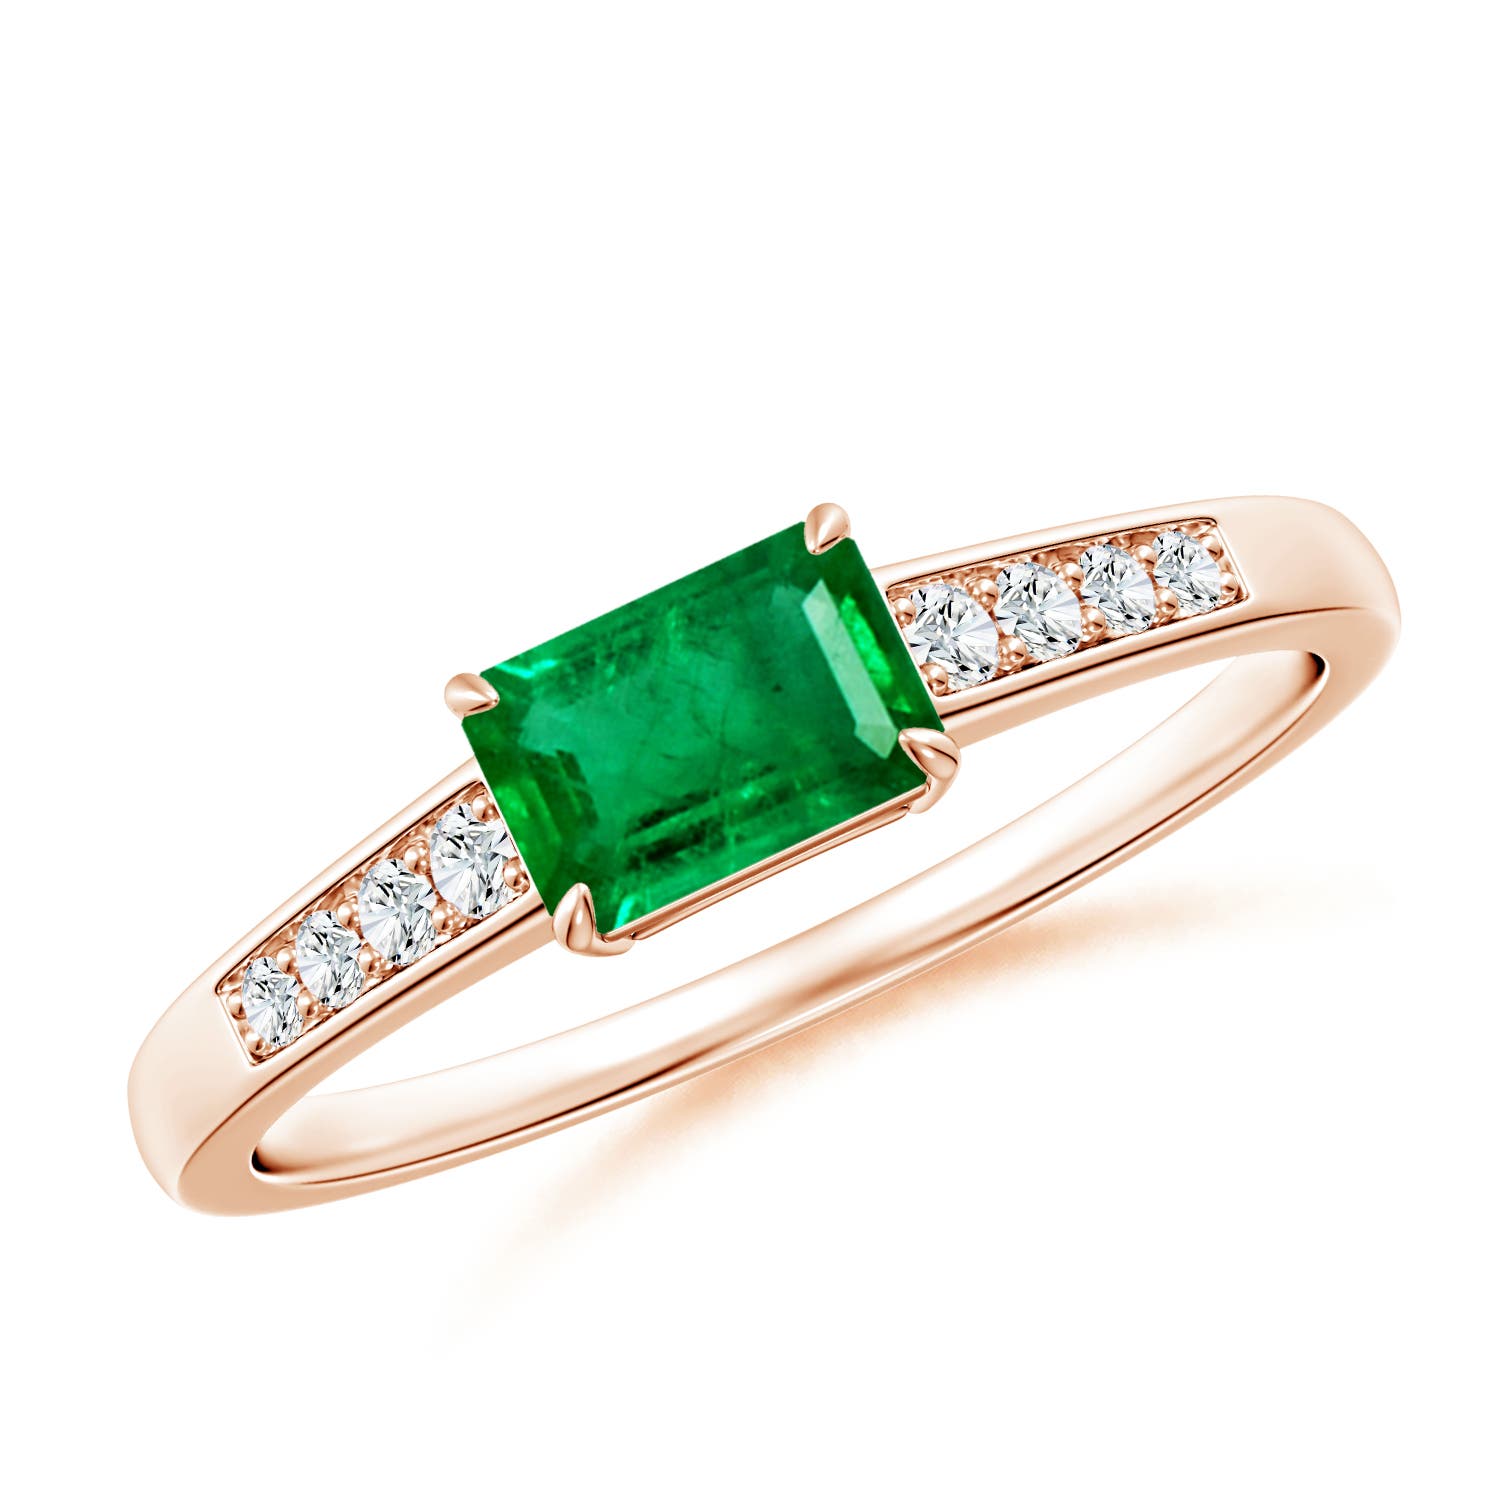 AAA - Emerald / 0.61 CT / 14 KT Rose Gold